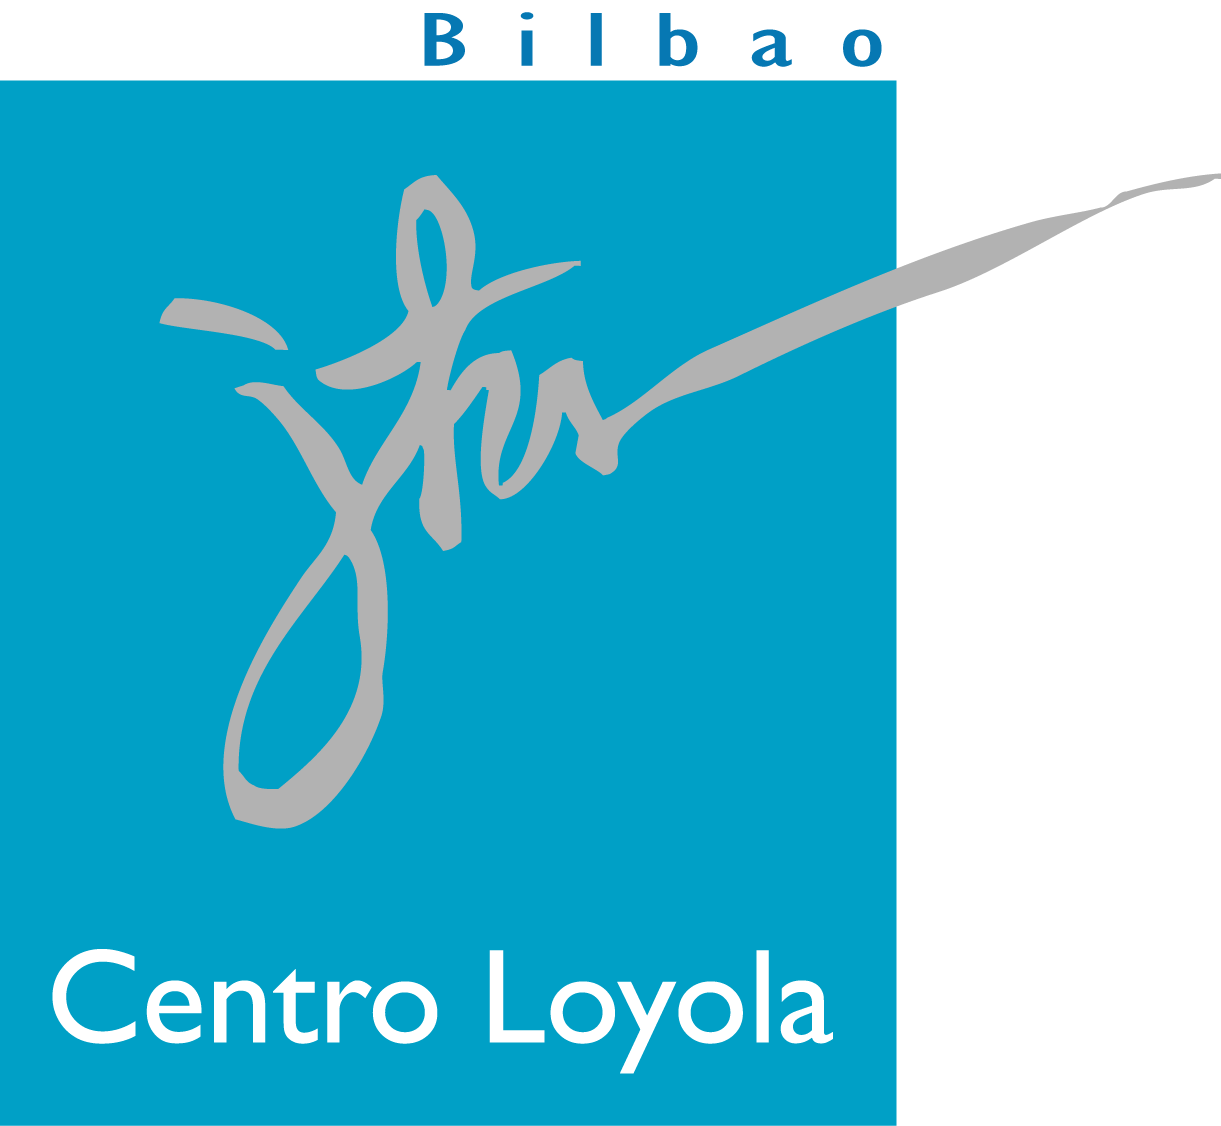 [Centro+loyola+ihs3.png]